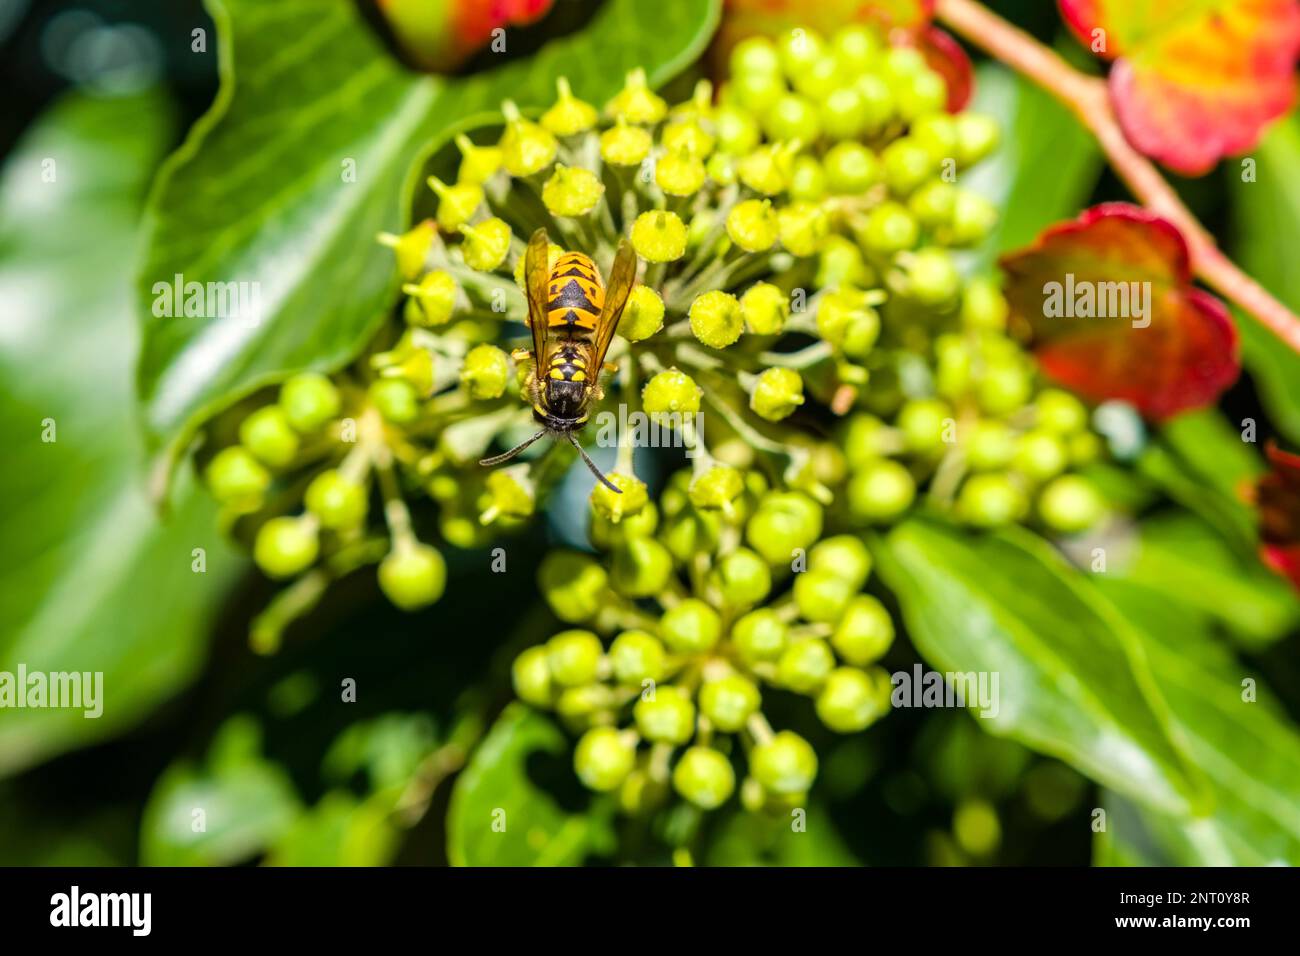 An European hornet (Vespa crabro) sitting on the blossom of an common ivy (Hedera helix) branch. Stock Photo